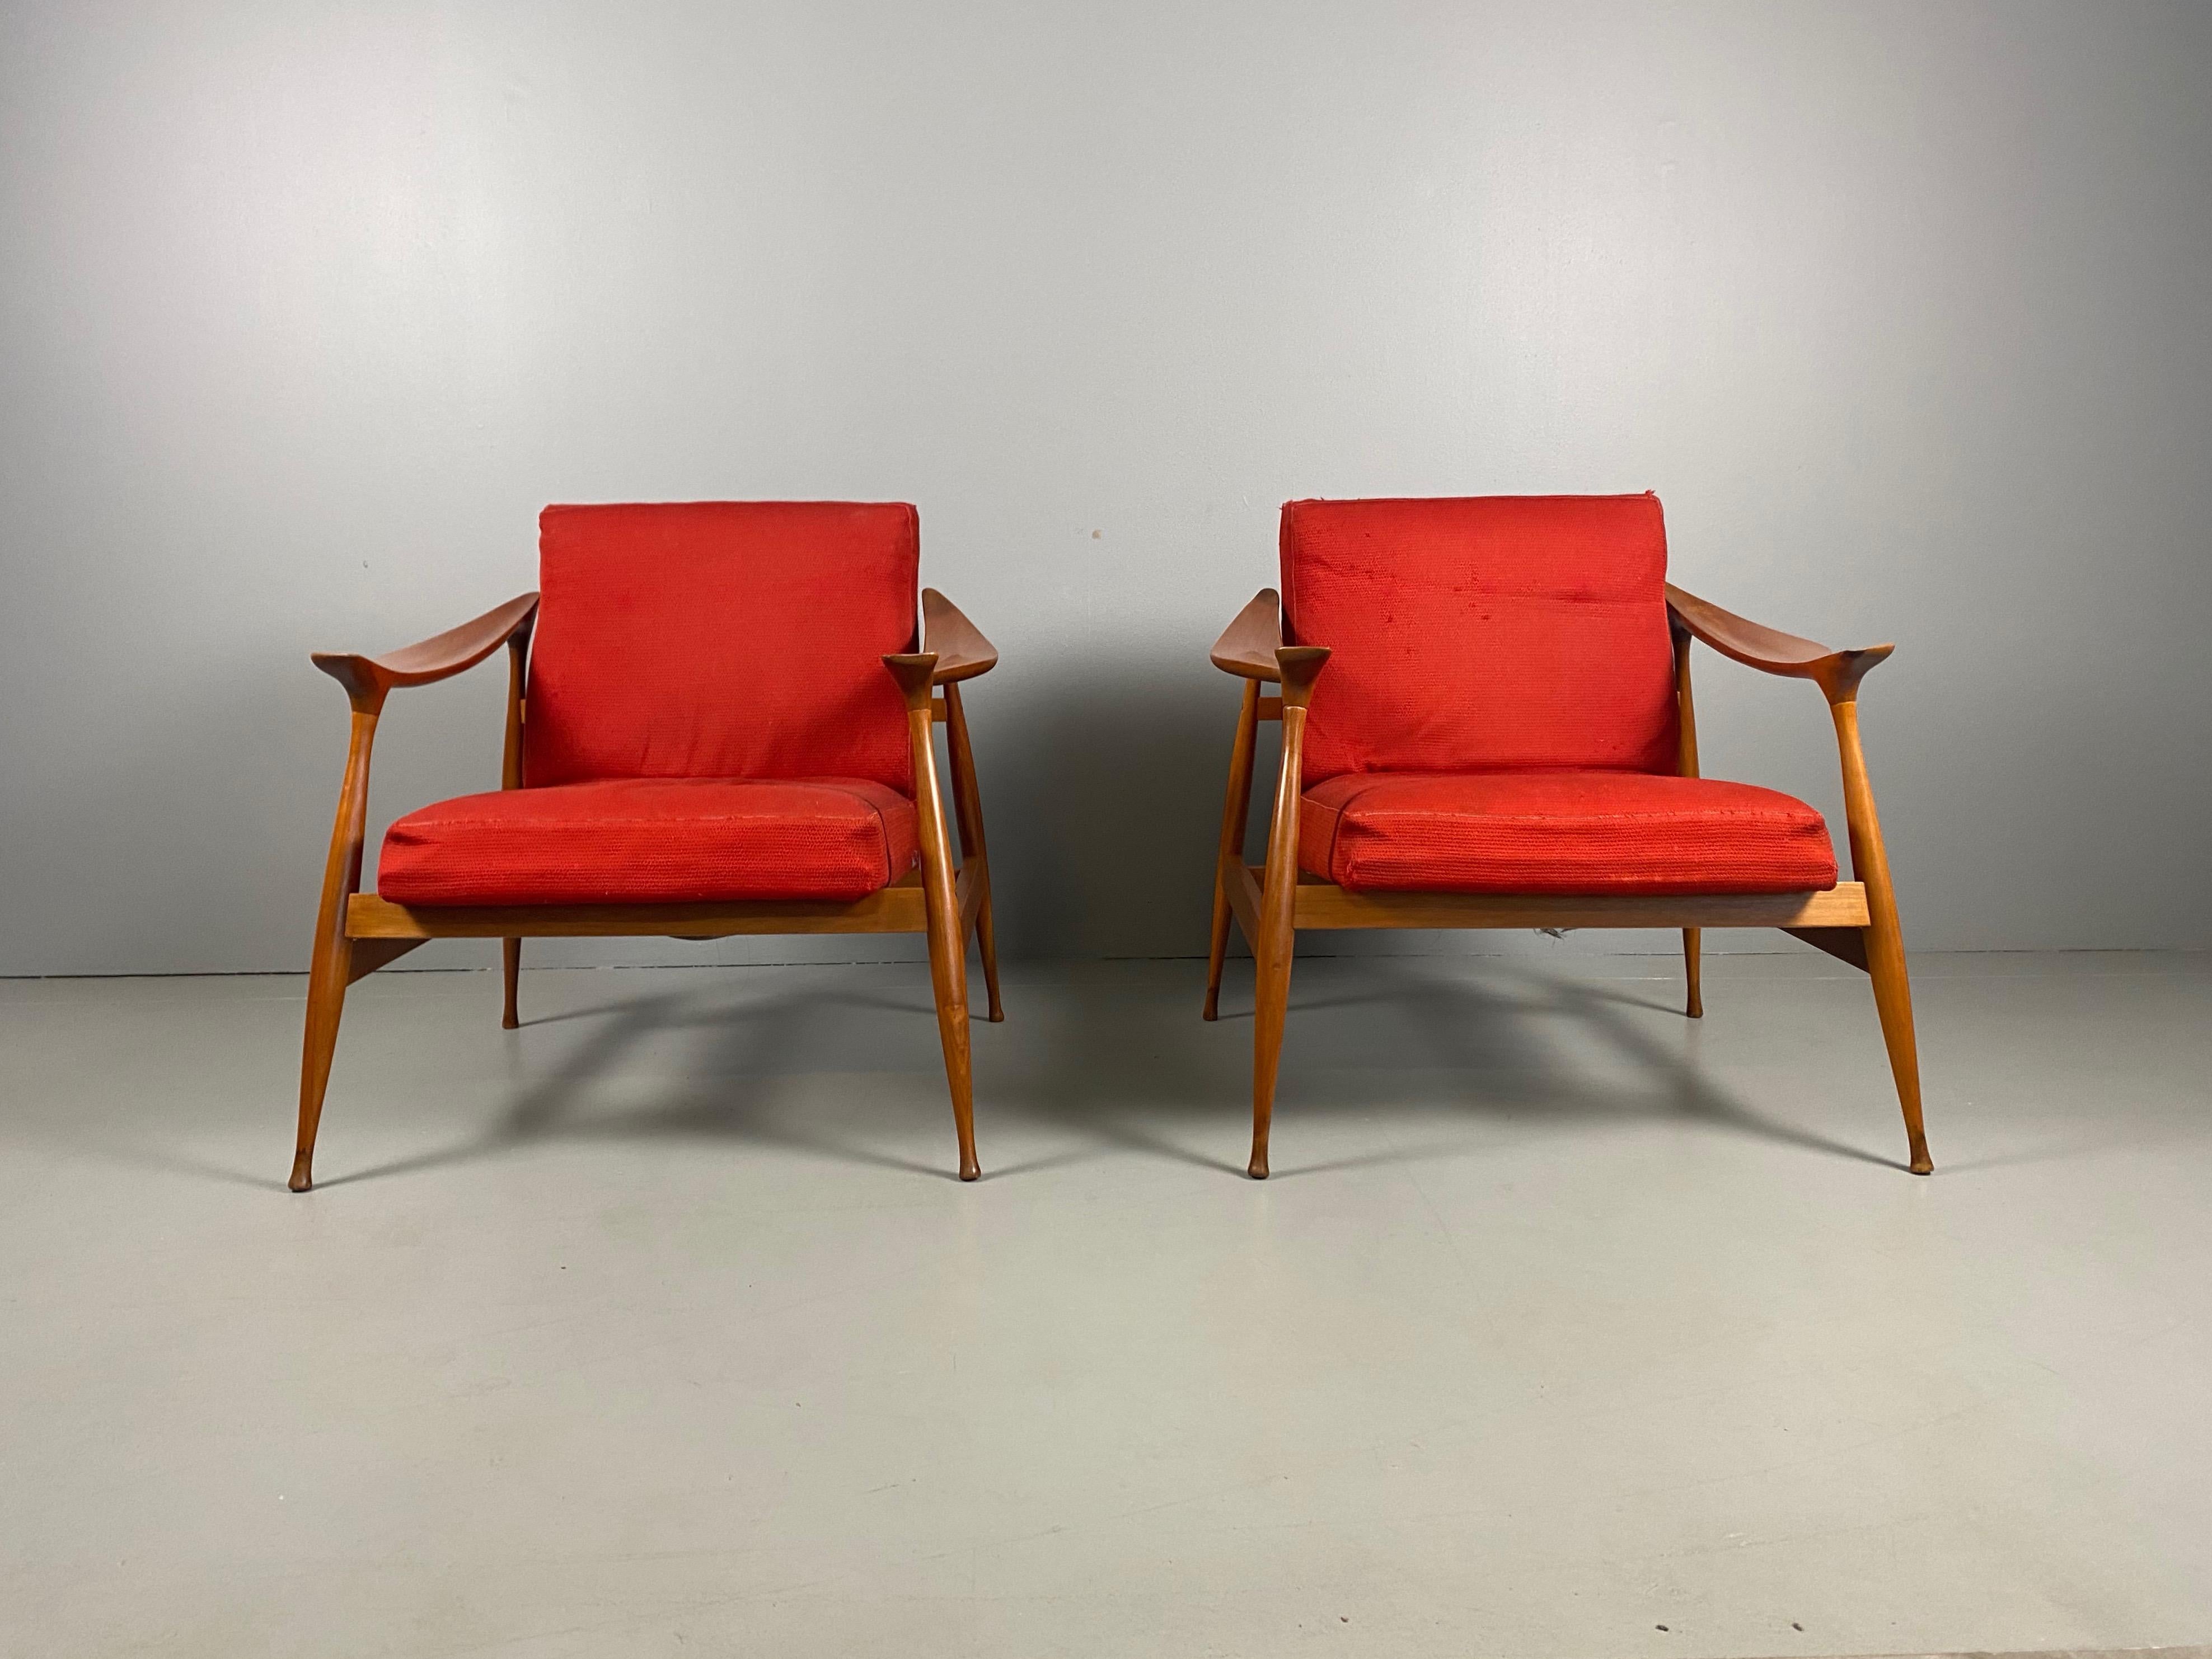 Fratelli Reguitti, pair of 'Lord' armchairs, walnut, red fabric upholstery, Italy, 1959.
Beautiful armchairs walnut by Fratelli Reguitti. The wooden frame has a beautiful detailed and organic shaped design.
The high cylindrical legs are tapered.